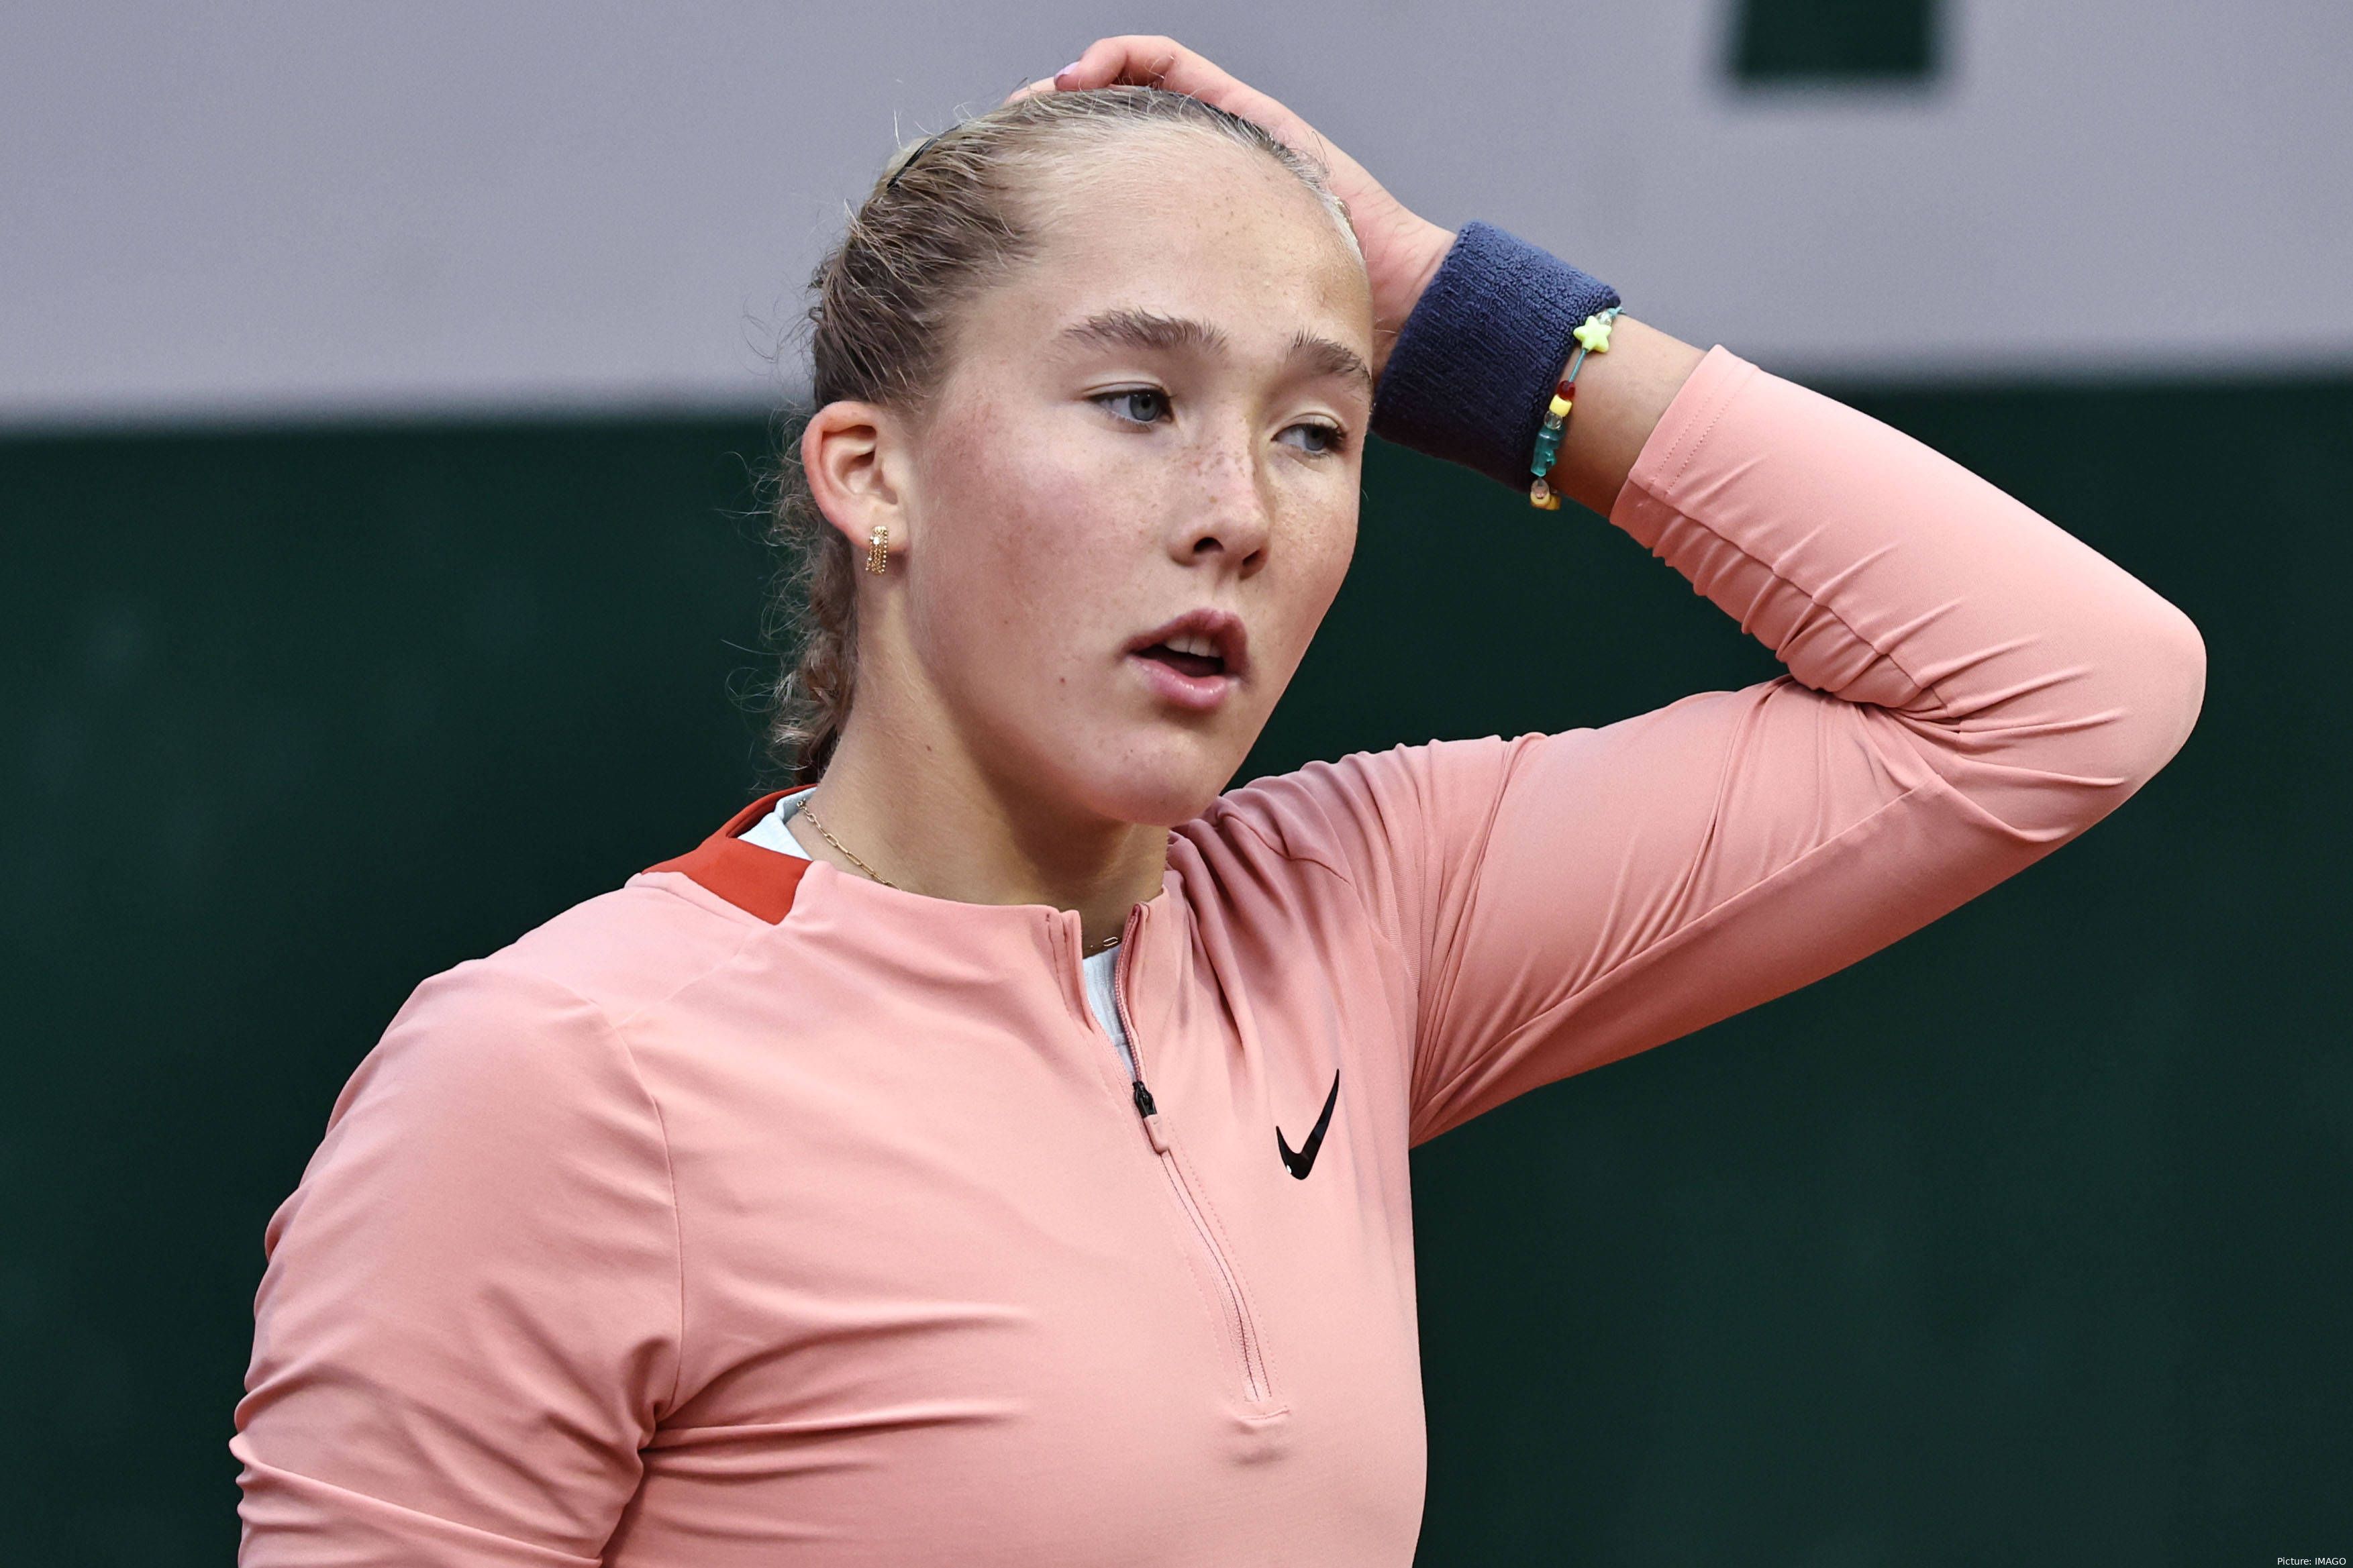 The prodigy standing in the way of Aryna Sabalenka - 17-year-old Mirra Andreeva.